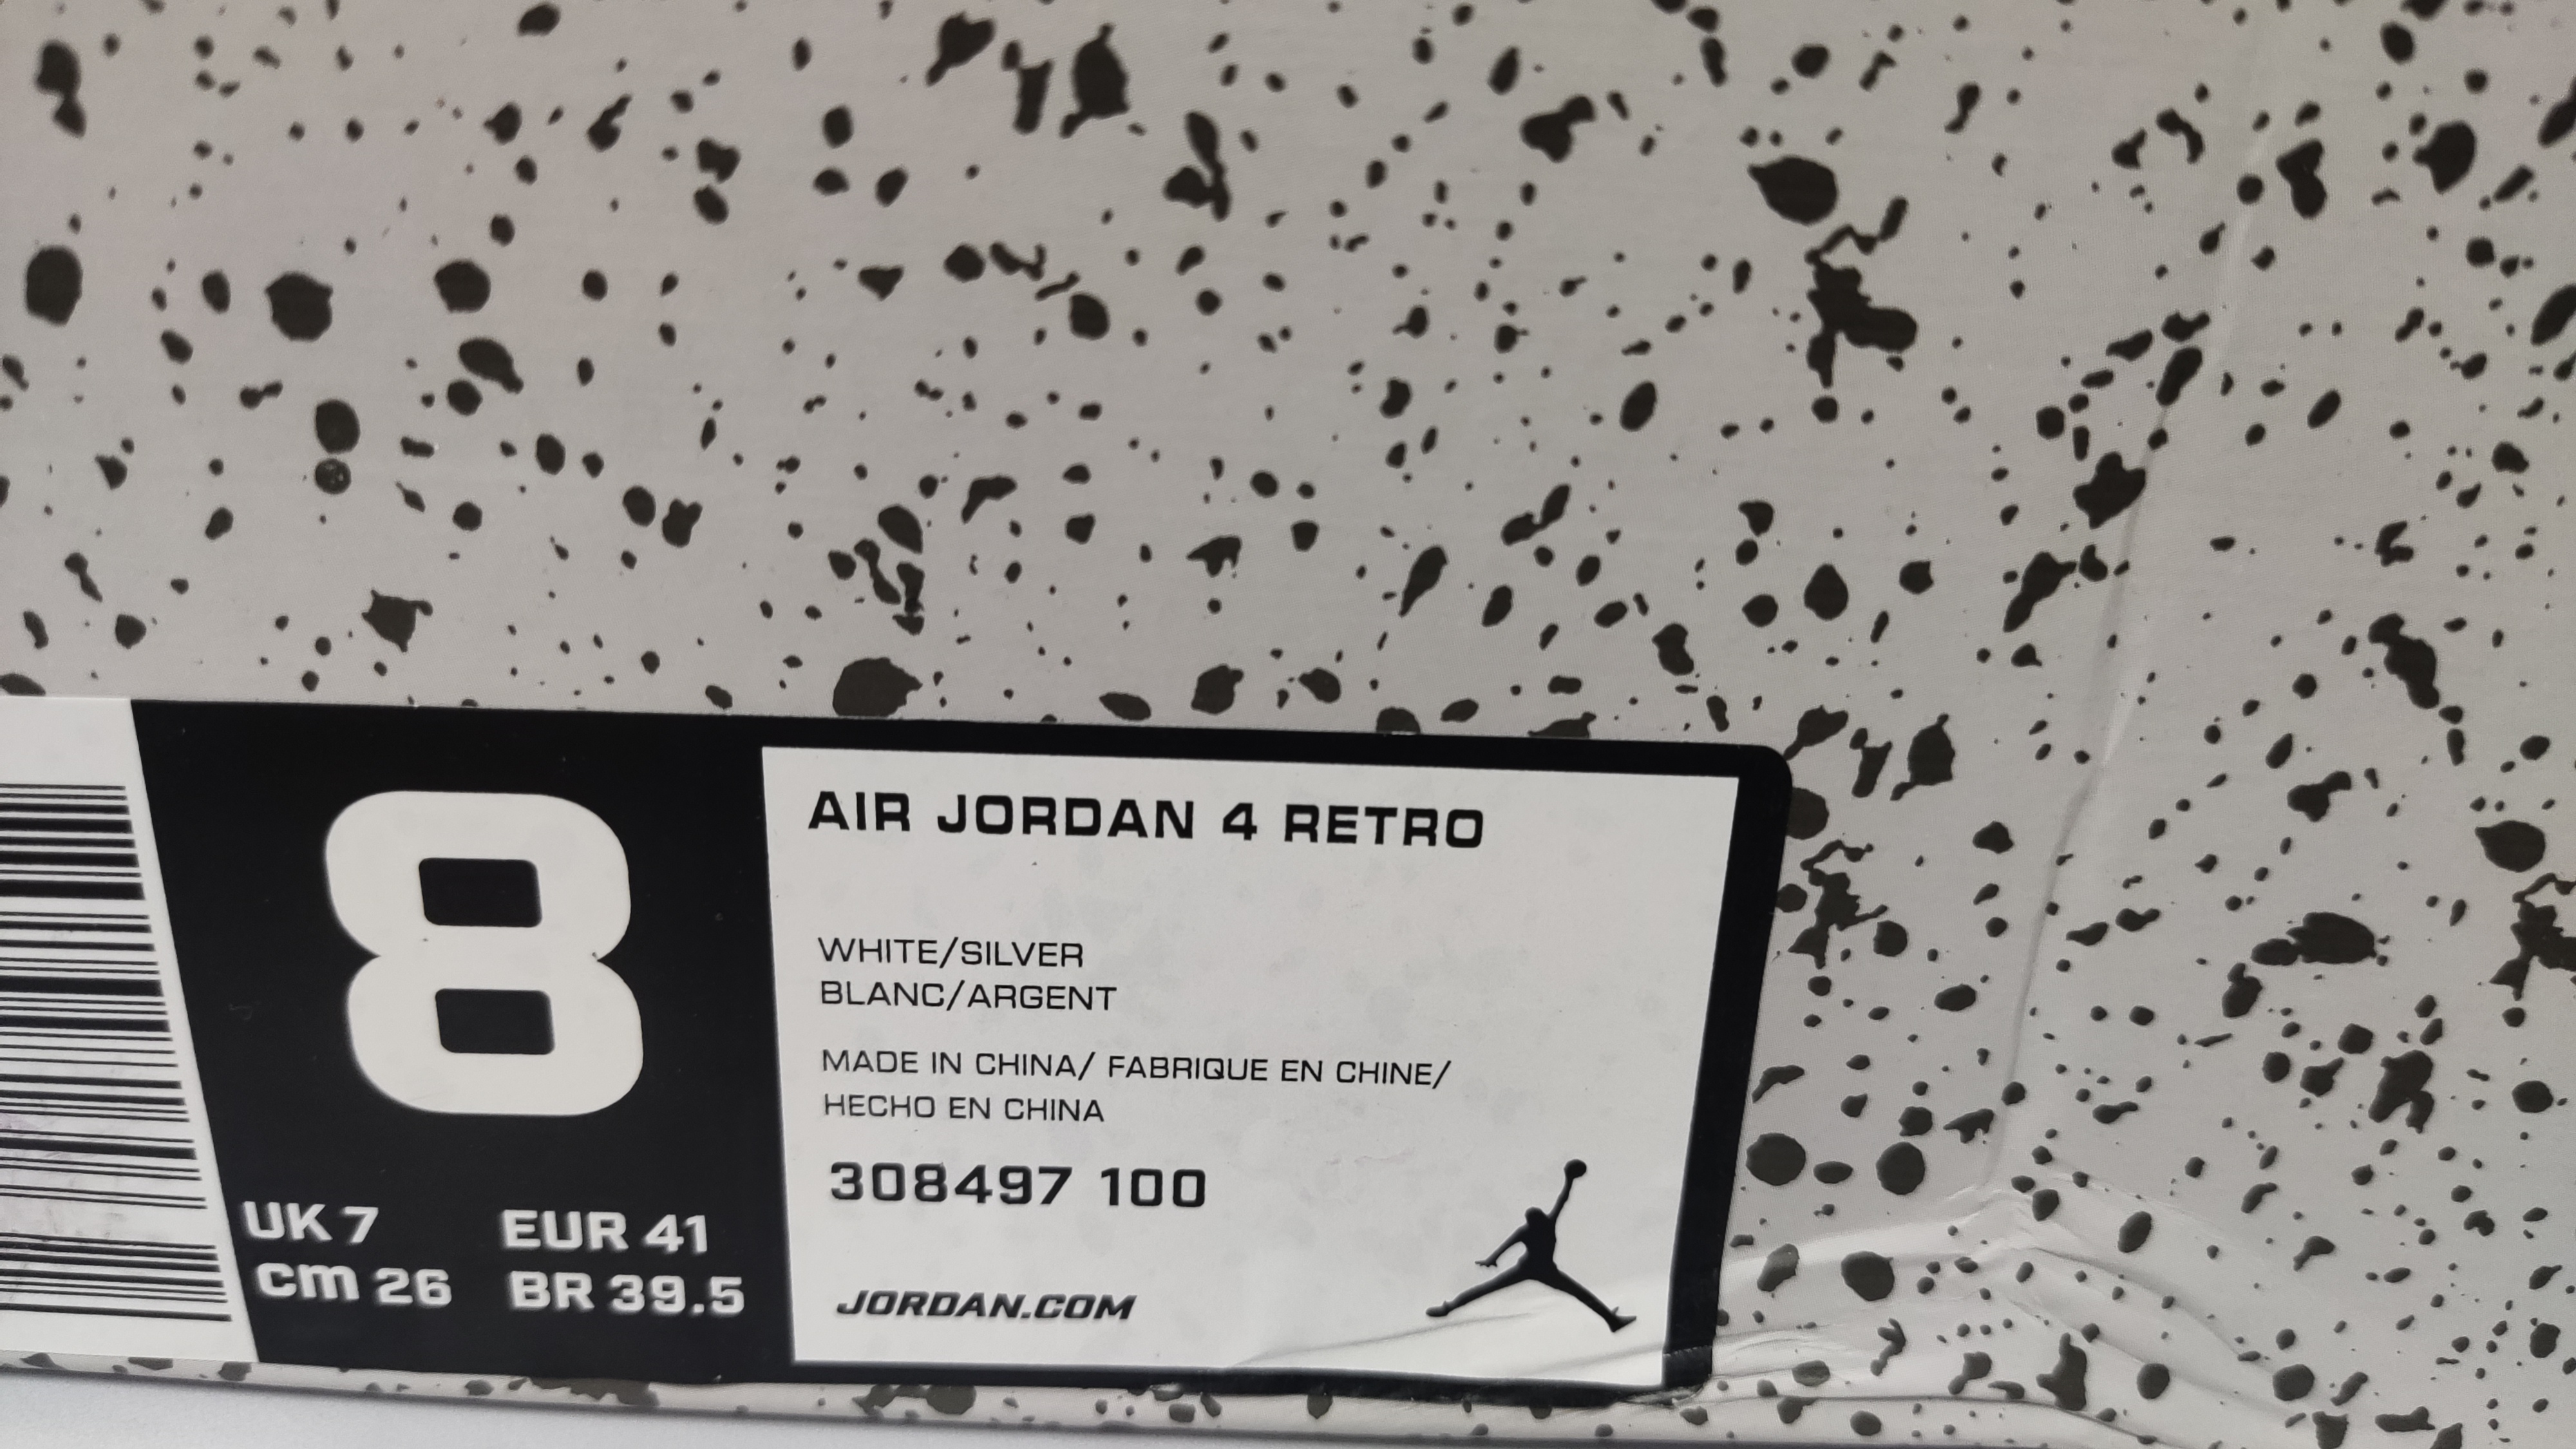 Quality Check Picture Replica Jordan 4 Retro Pure Money From Jdfoot